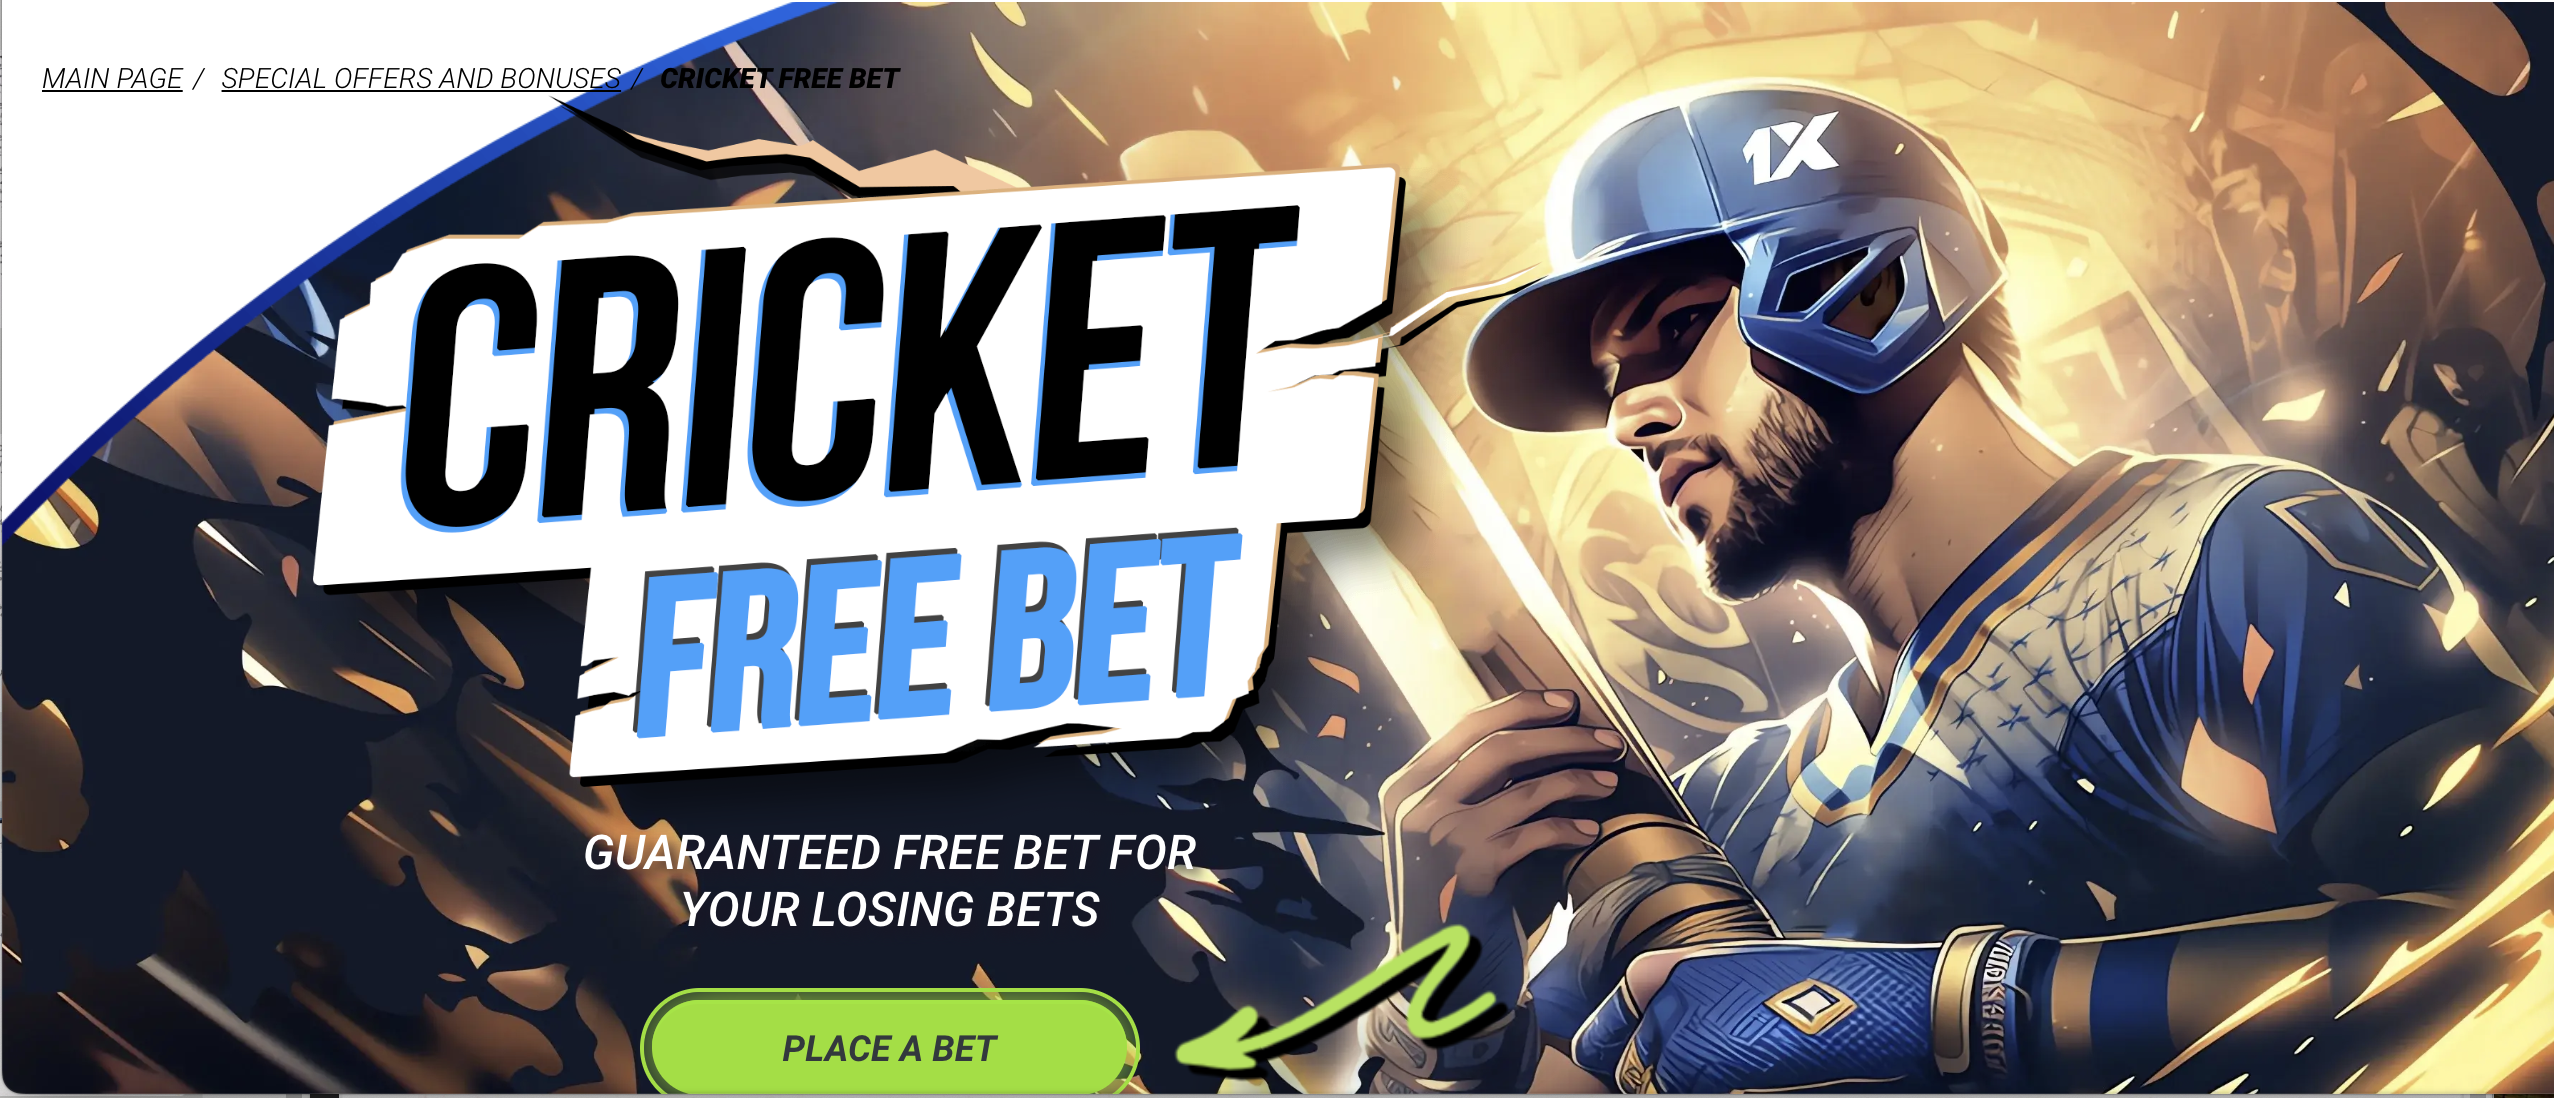 1xBet India Cricket Free Bet up to 2504 INR